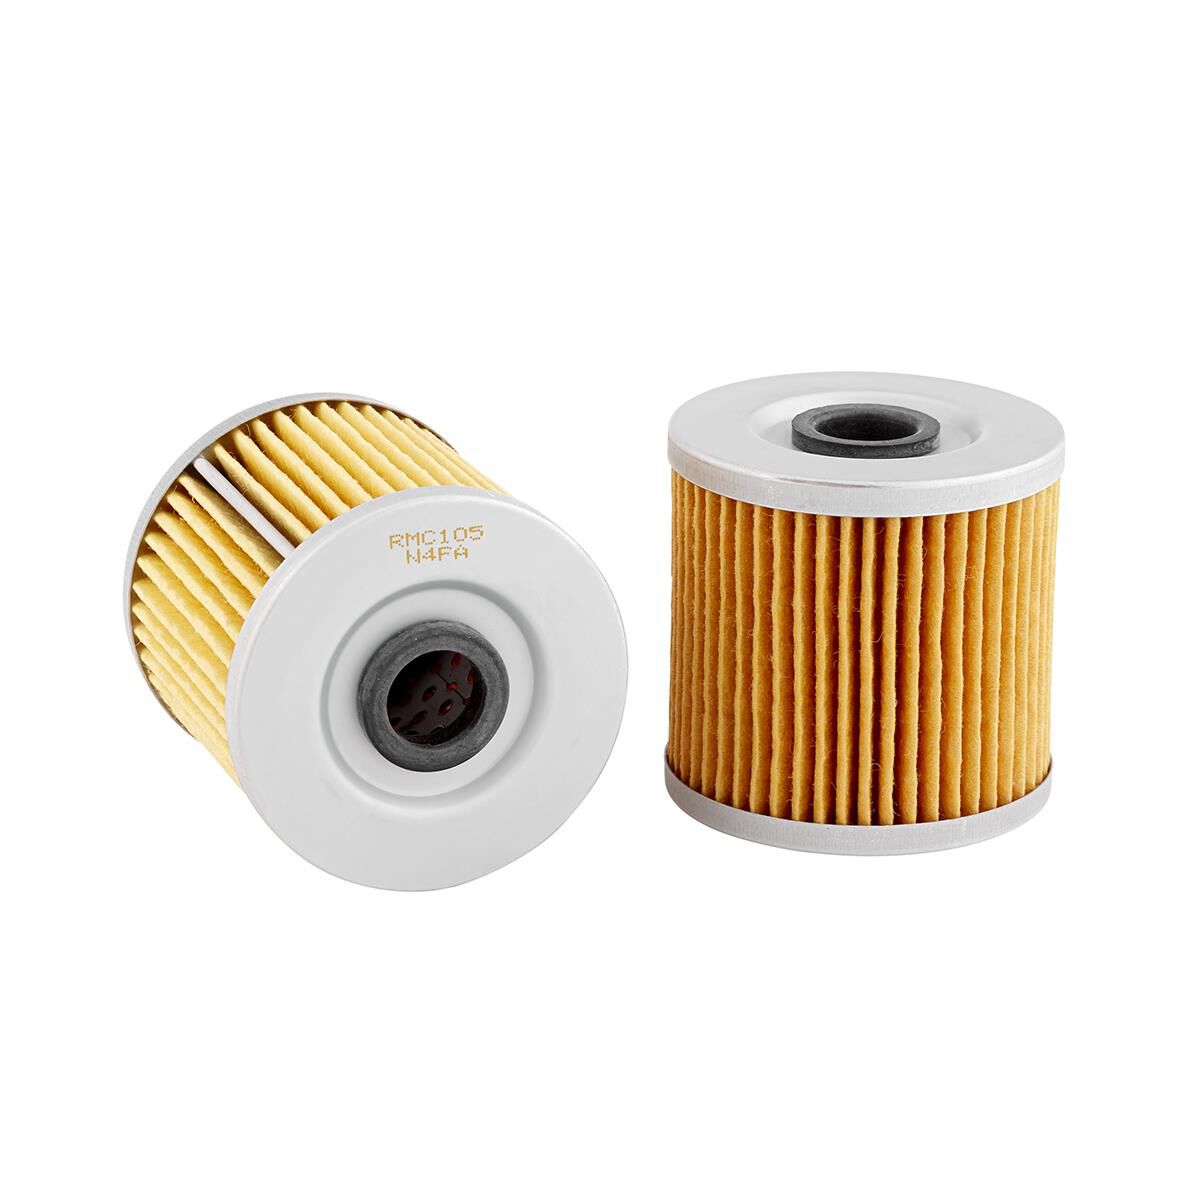 RYCO MOTORCYCLE OIL FILTER - RMC105, , scaau_hi-res